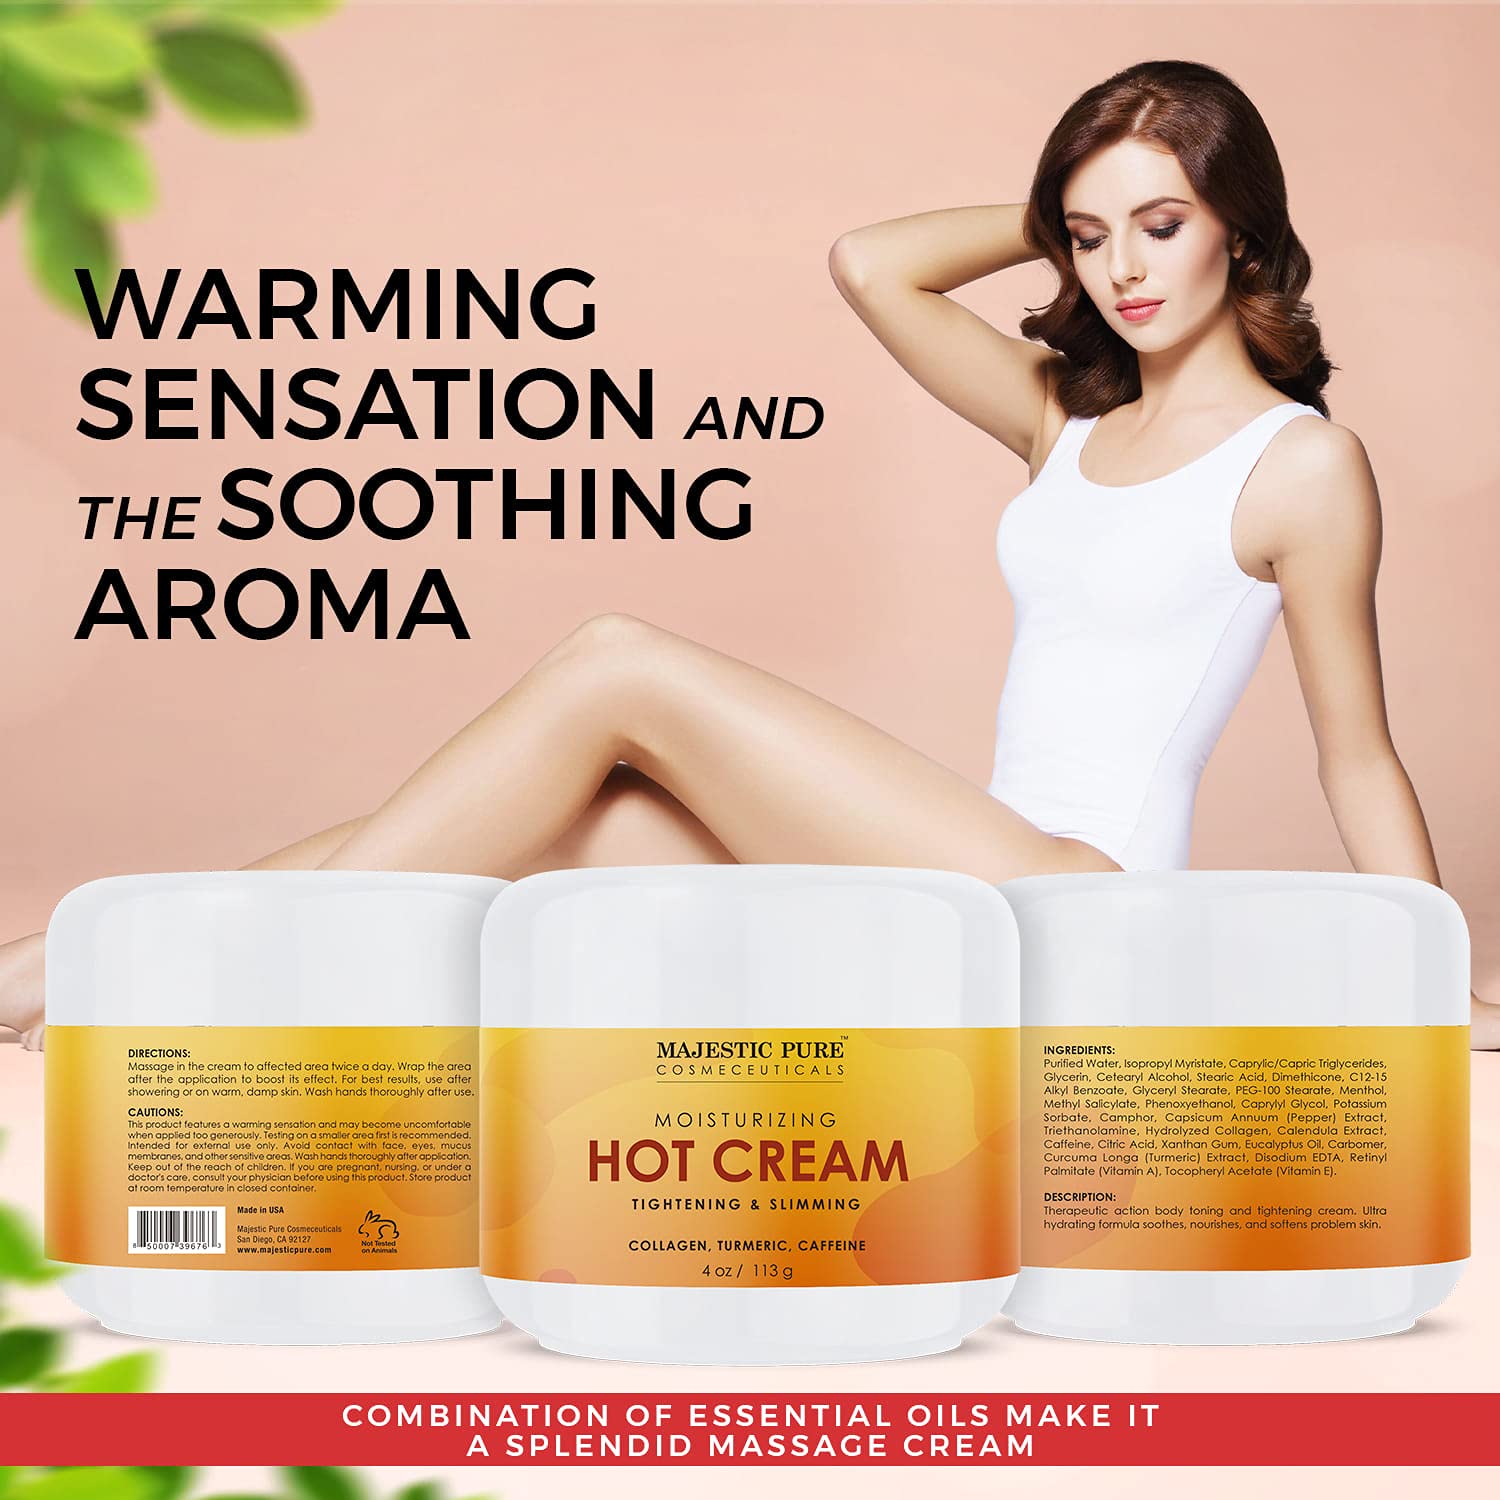 Majestic Pure Hot Cream - for Cellulite, Soothing, Relaxing, Tightening & Slimming - with Collagen, Turmeric, Vitamin A, E, - Body Firming Cream, 4 oz : Beauty & Personal Care